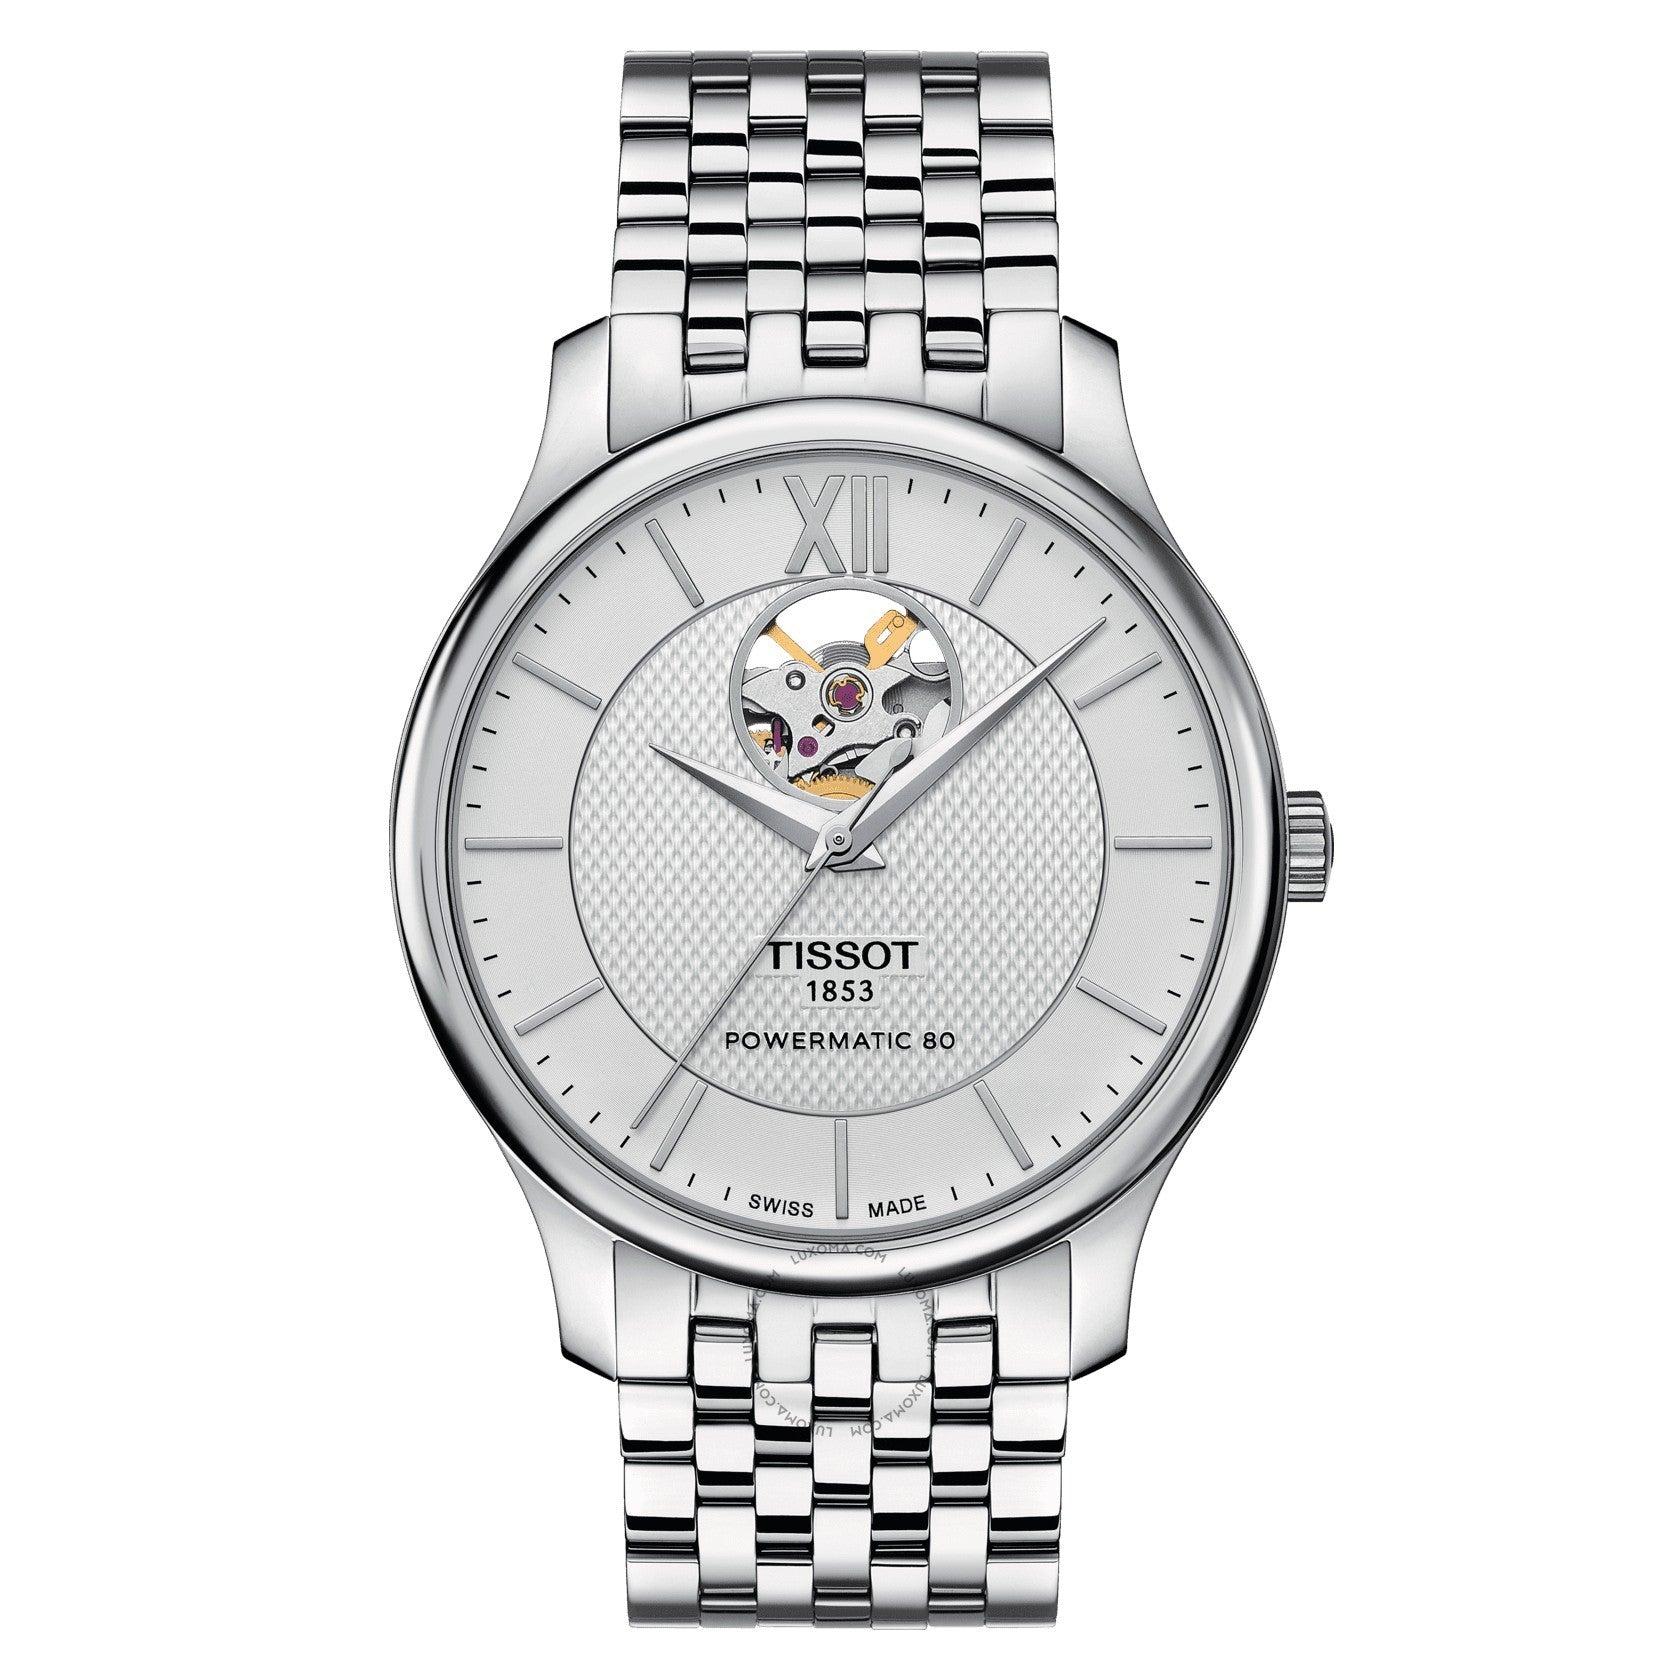 Tissot Tradition Automatic Silver (Open Heart) Dial Men's Watch T063.907.11.038.00